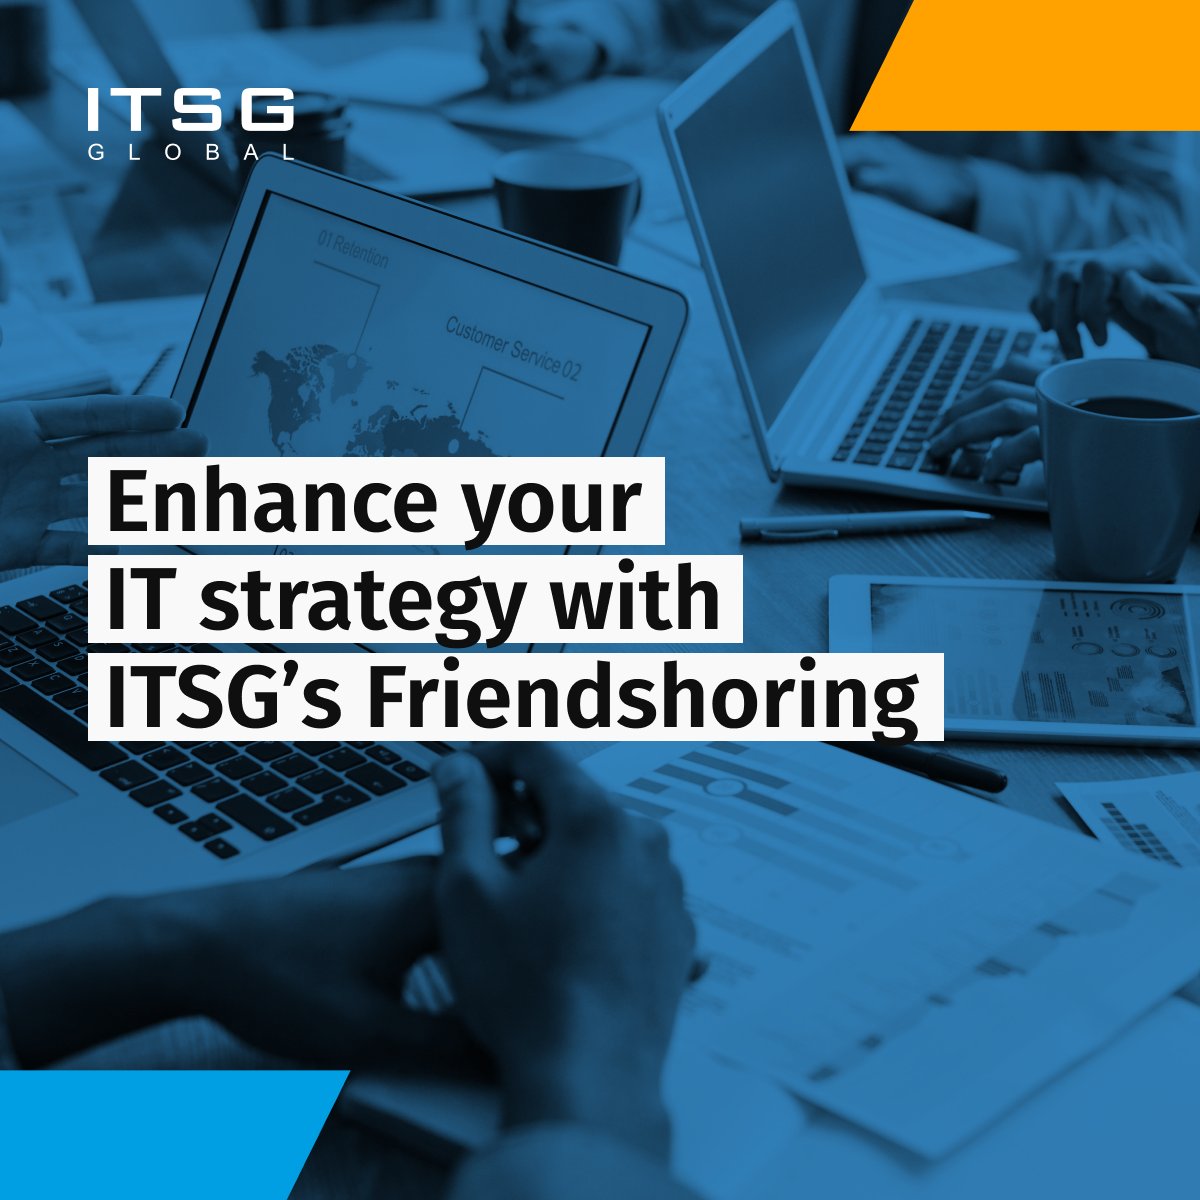 ITSG Global's experienced engineers are here to assist in exactly the way you need! 🤝 Learn more: itsg-global.com/solutions/tale… 👈 #ITSG #NextGenAI #LangChainTechnology #VectorDatabases #AIAdvancement #FriendshoringExcellence #TechFuturism